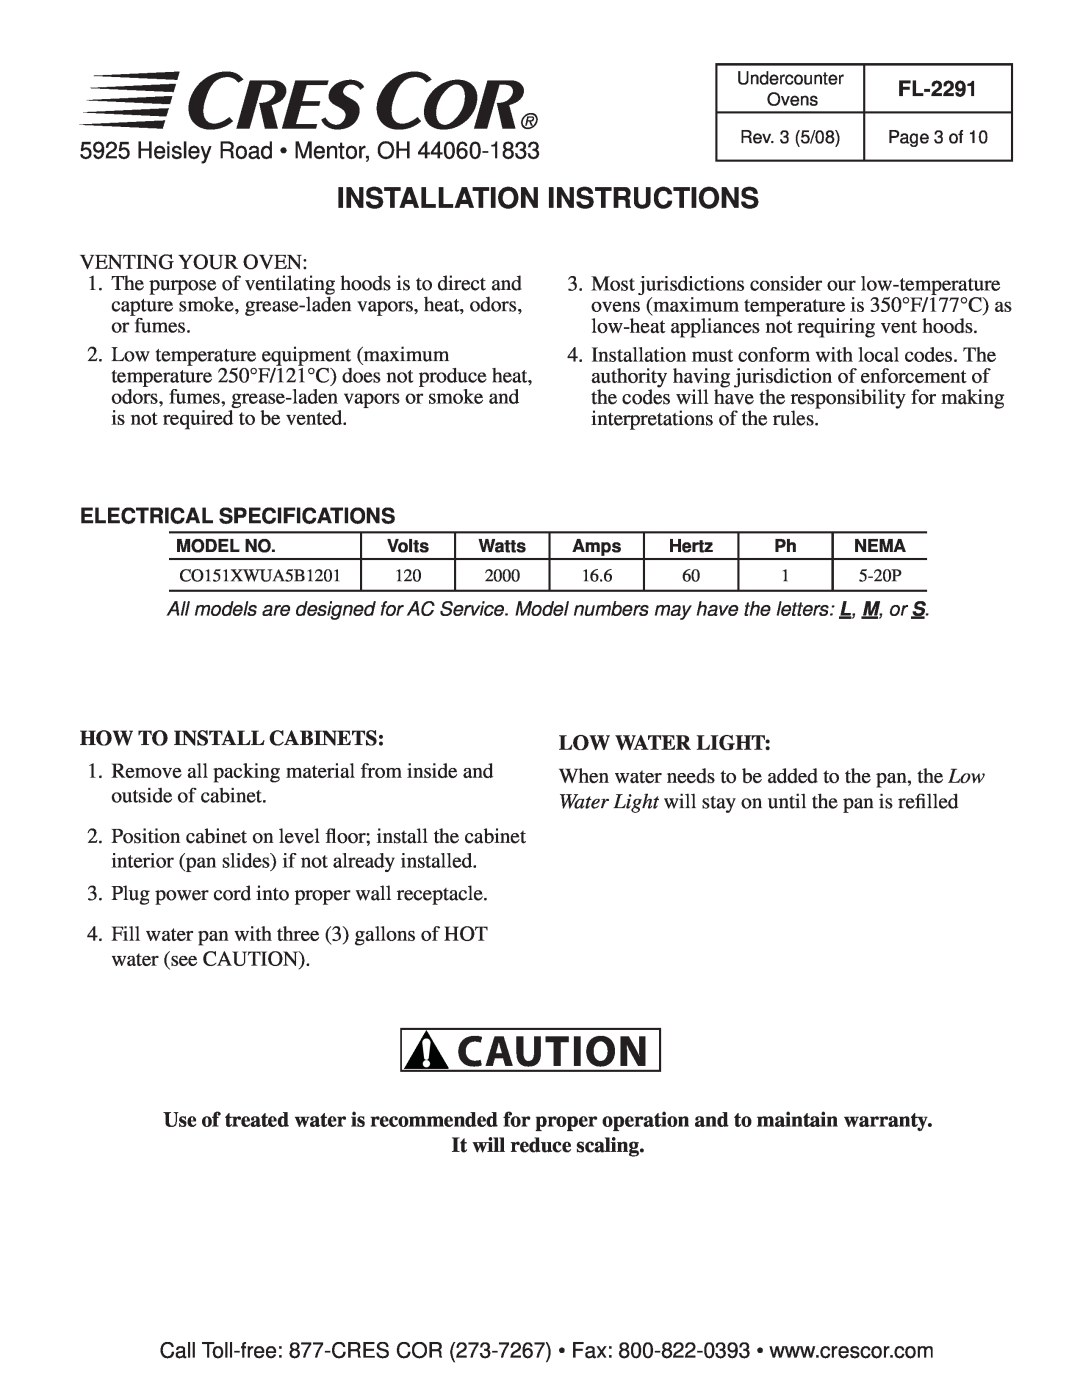 Cres Cor FL-2291 manual Installation Instructions, Heisley Road Mentor, OH, How To Install Cabinets, Low Water Light 